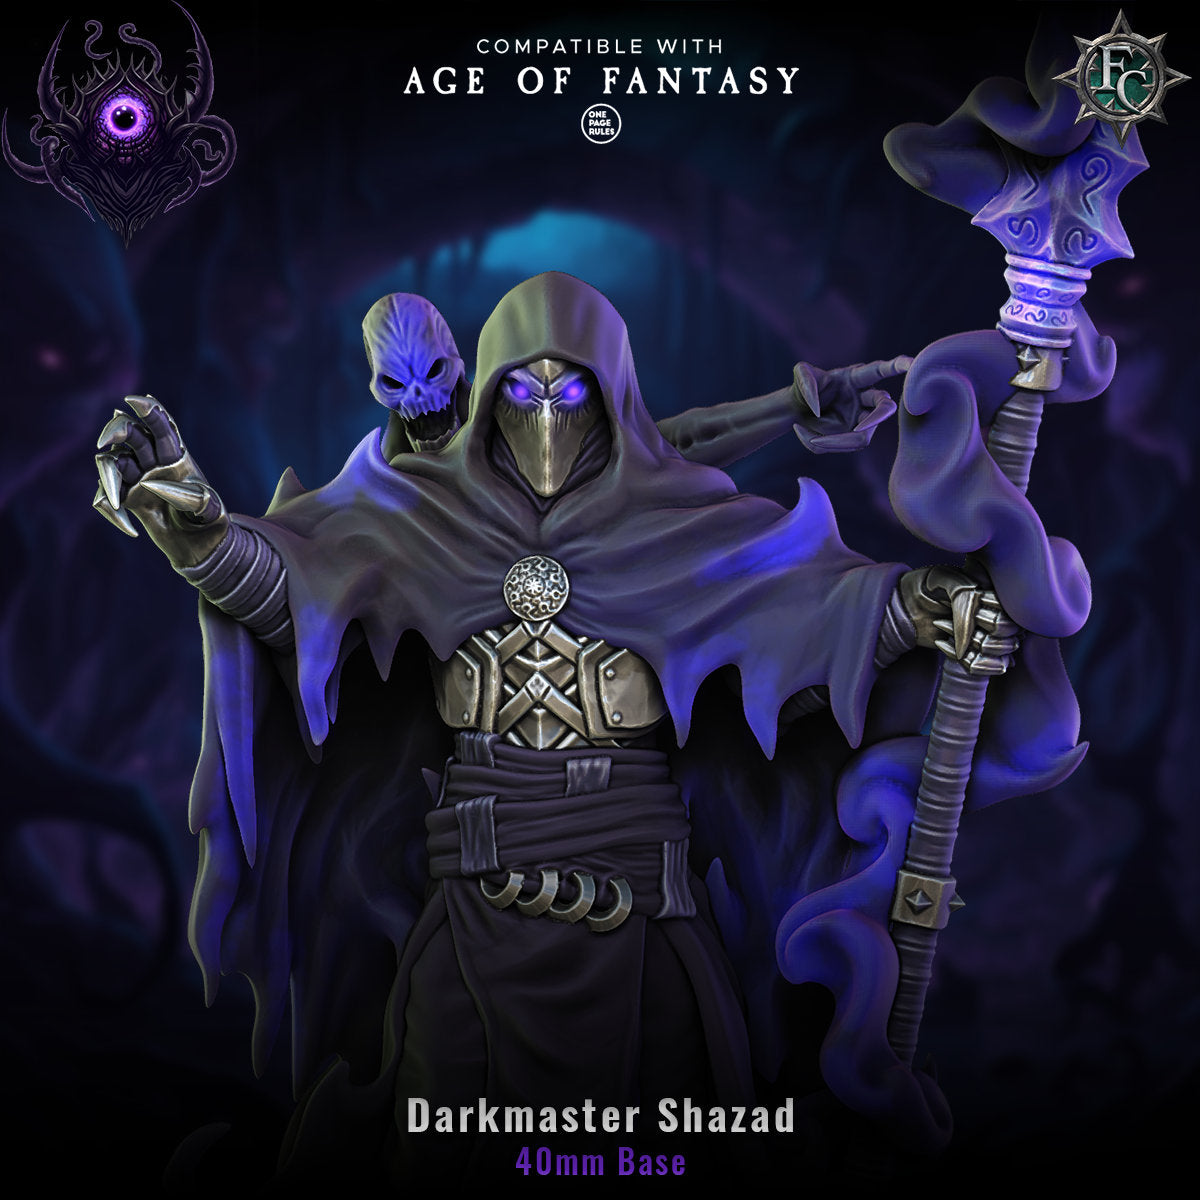 a character from the video game darkmaster shazad